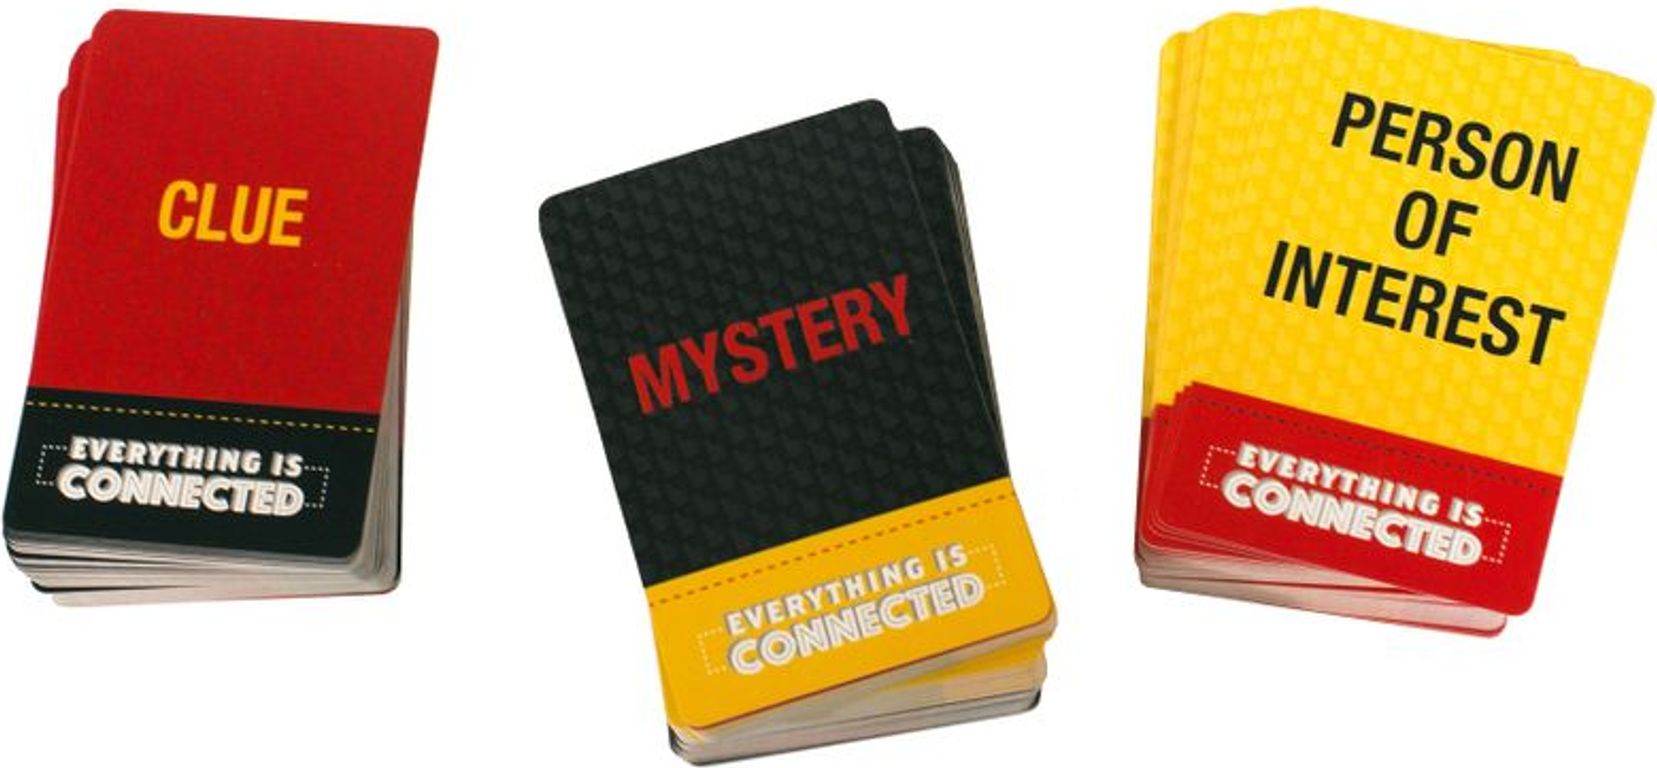 Dirk Gently's Holistic Detective Agency - Everything is Connected cards